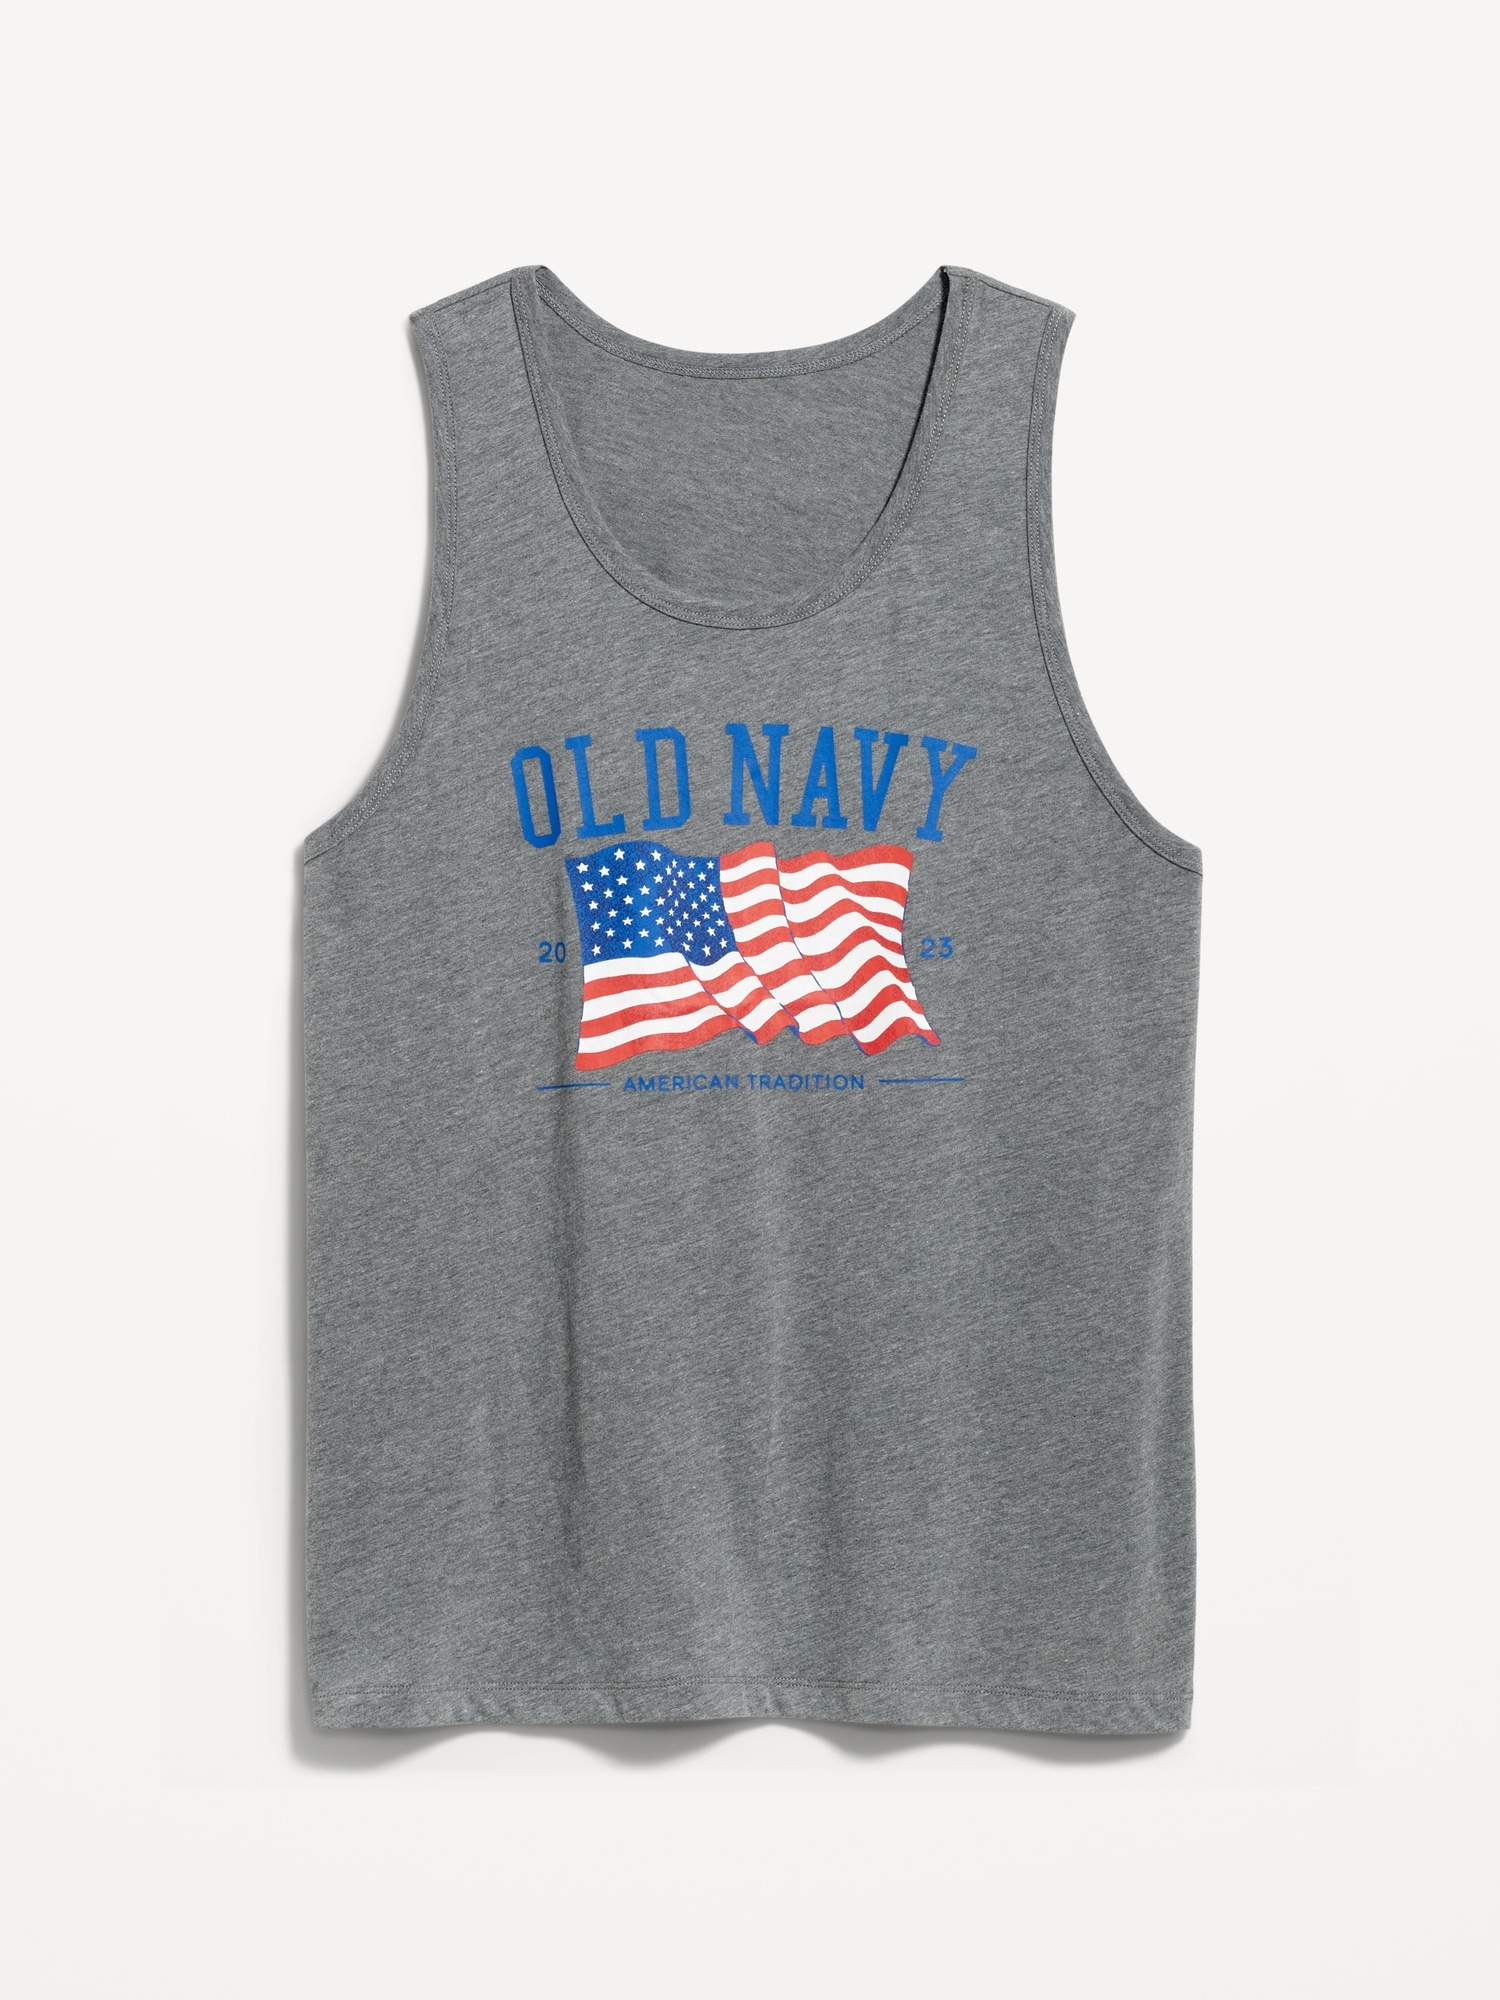 Old navy 4th of july shirt memes｜TikTok Search